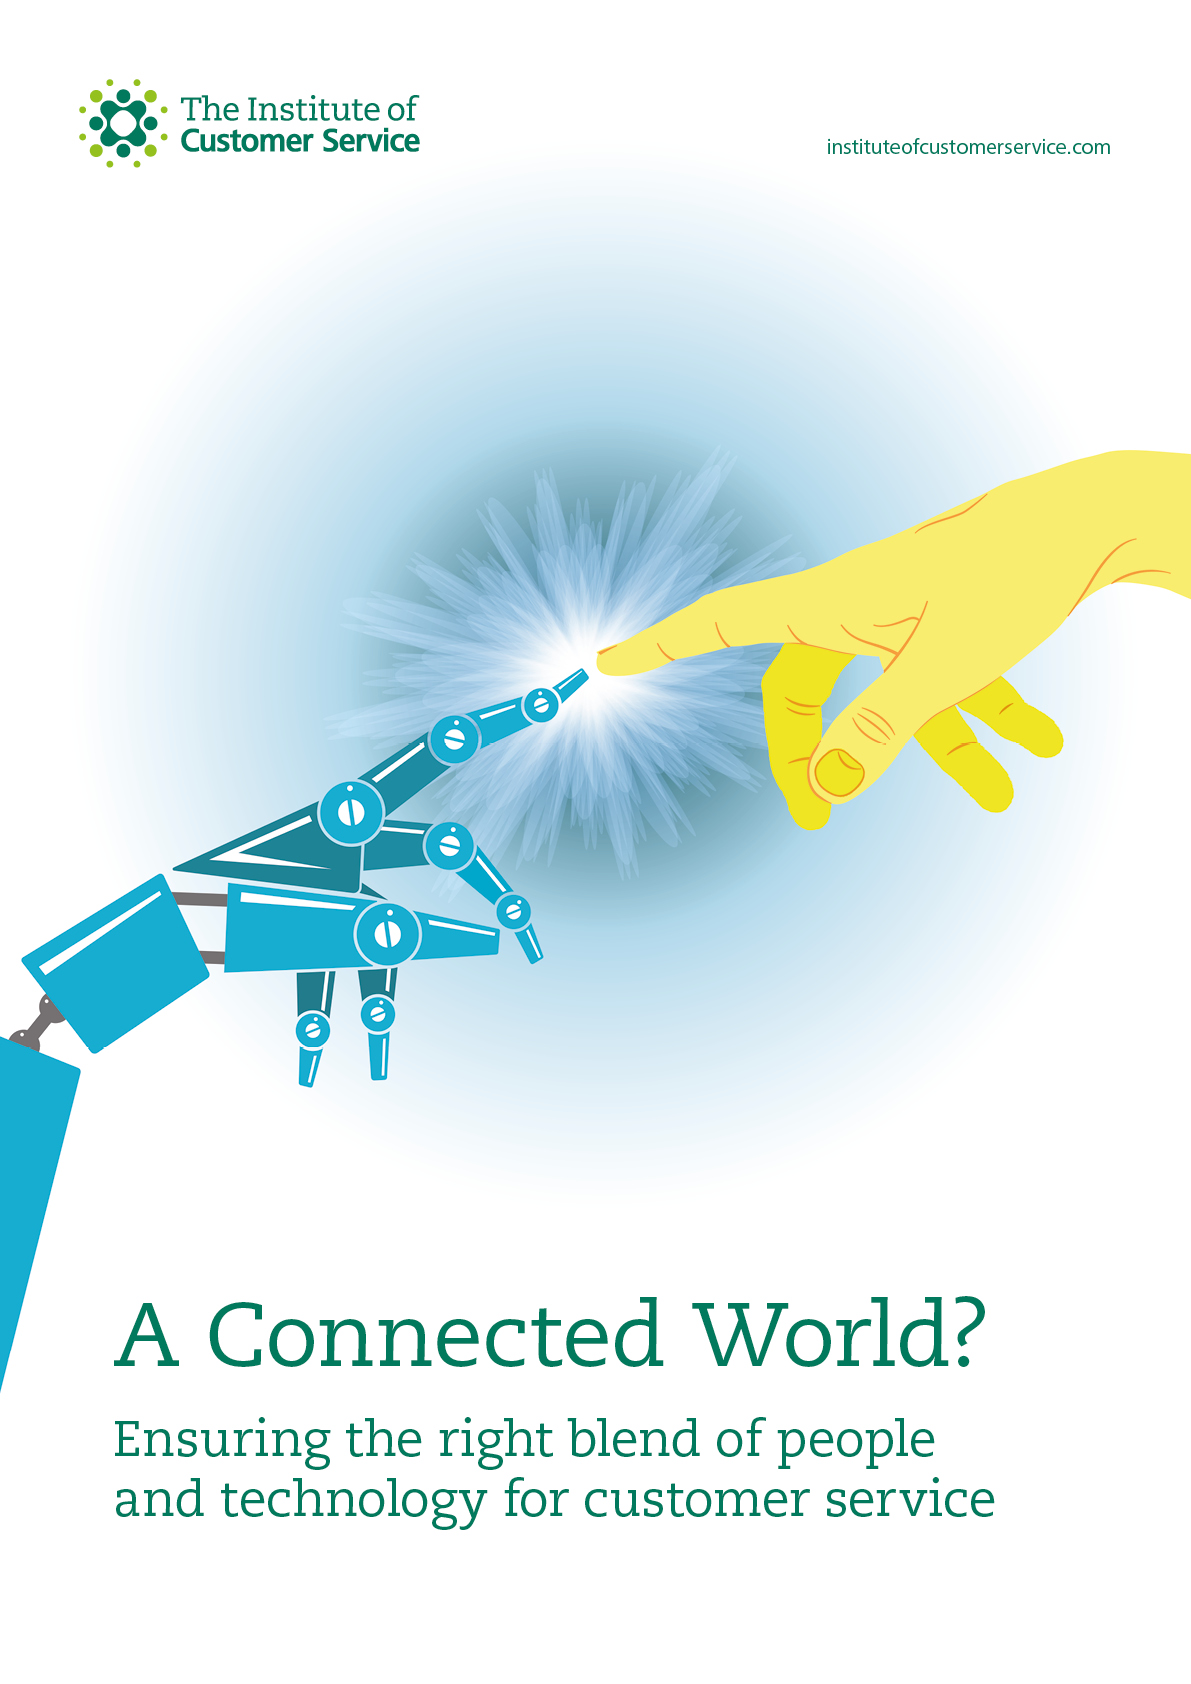 A Connected World? Ensuring the right blend of people and technology for customer service